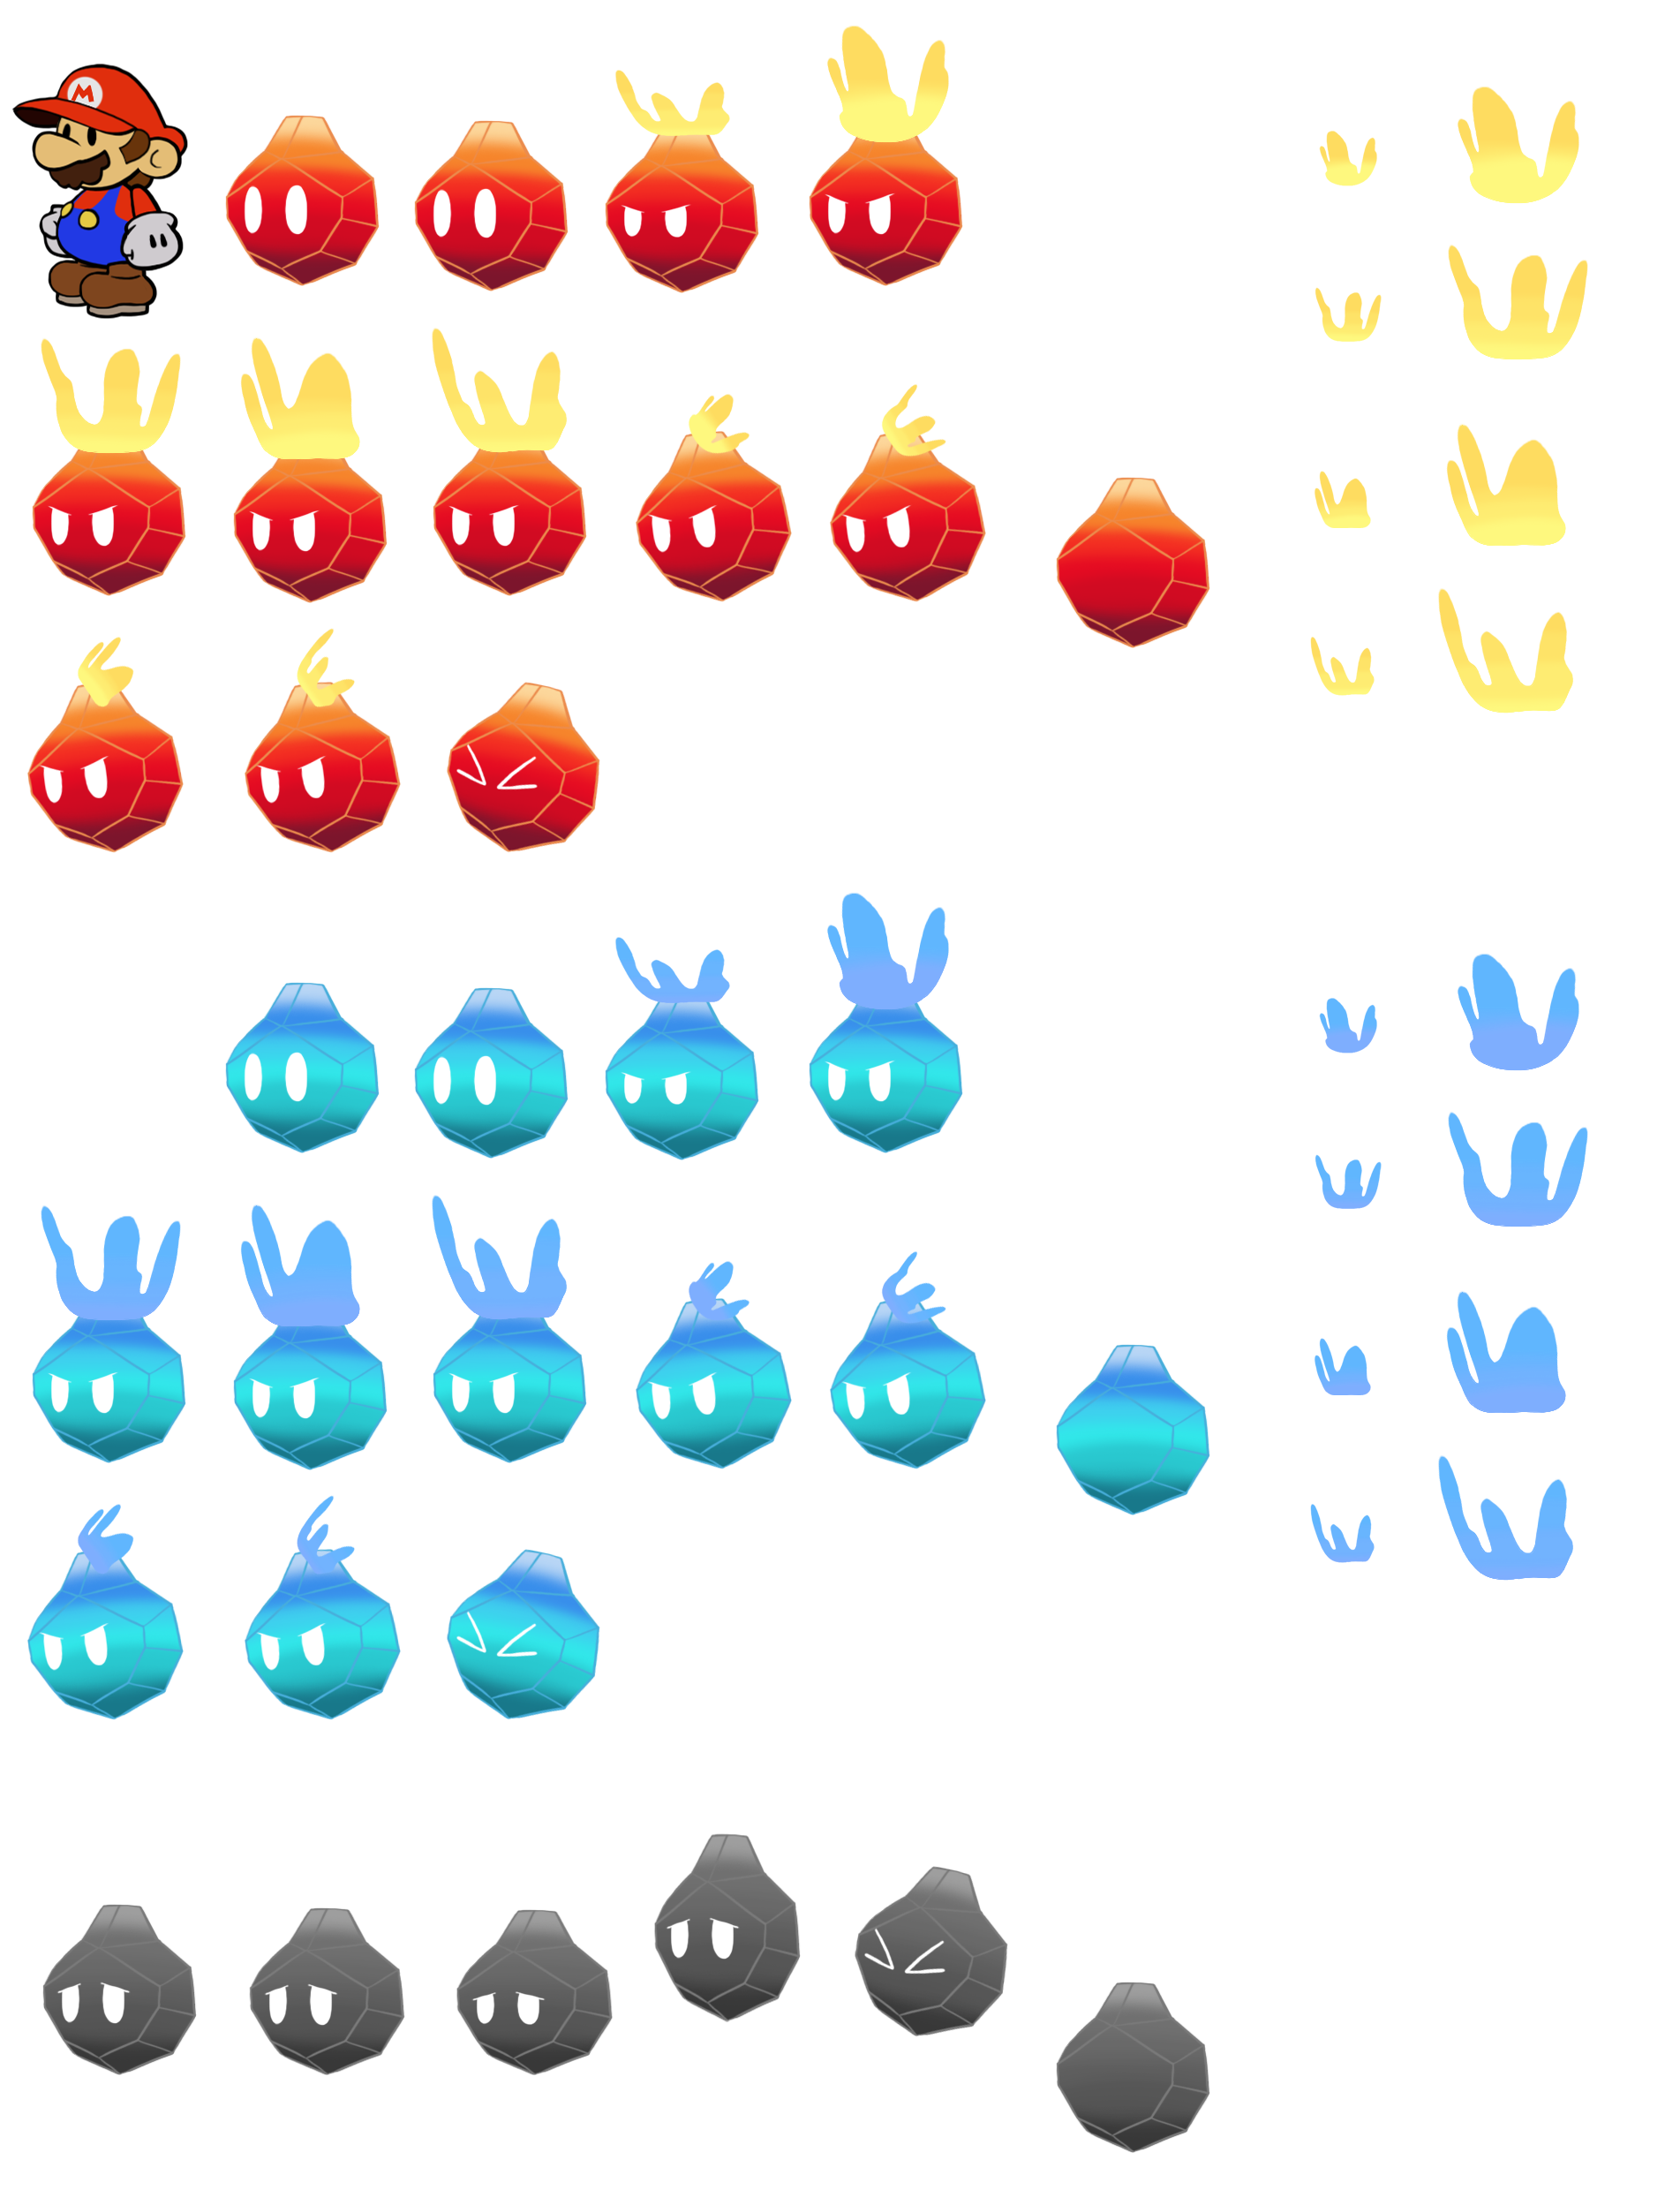 Lil Brr & Cinder (Paper Mario-Style)